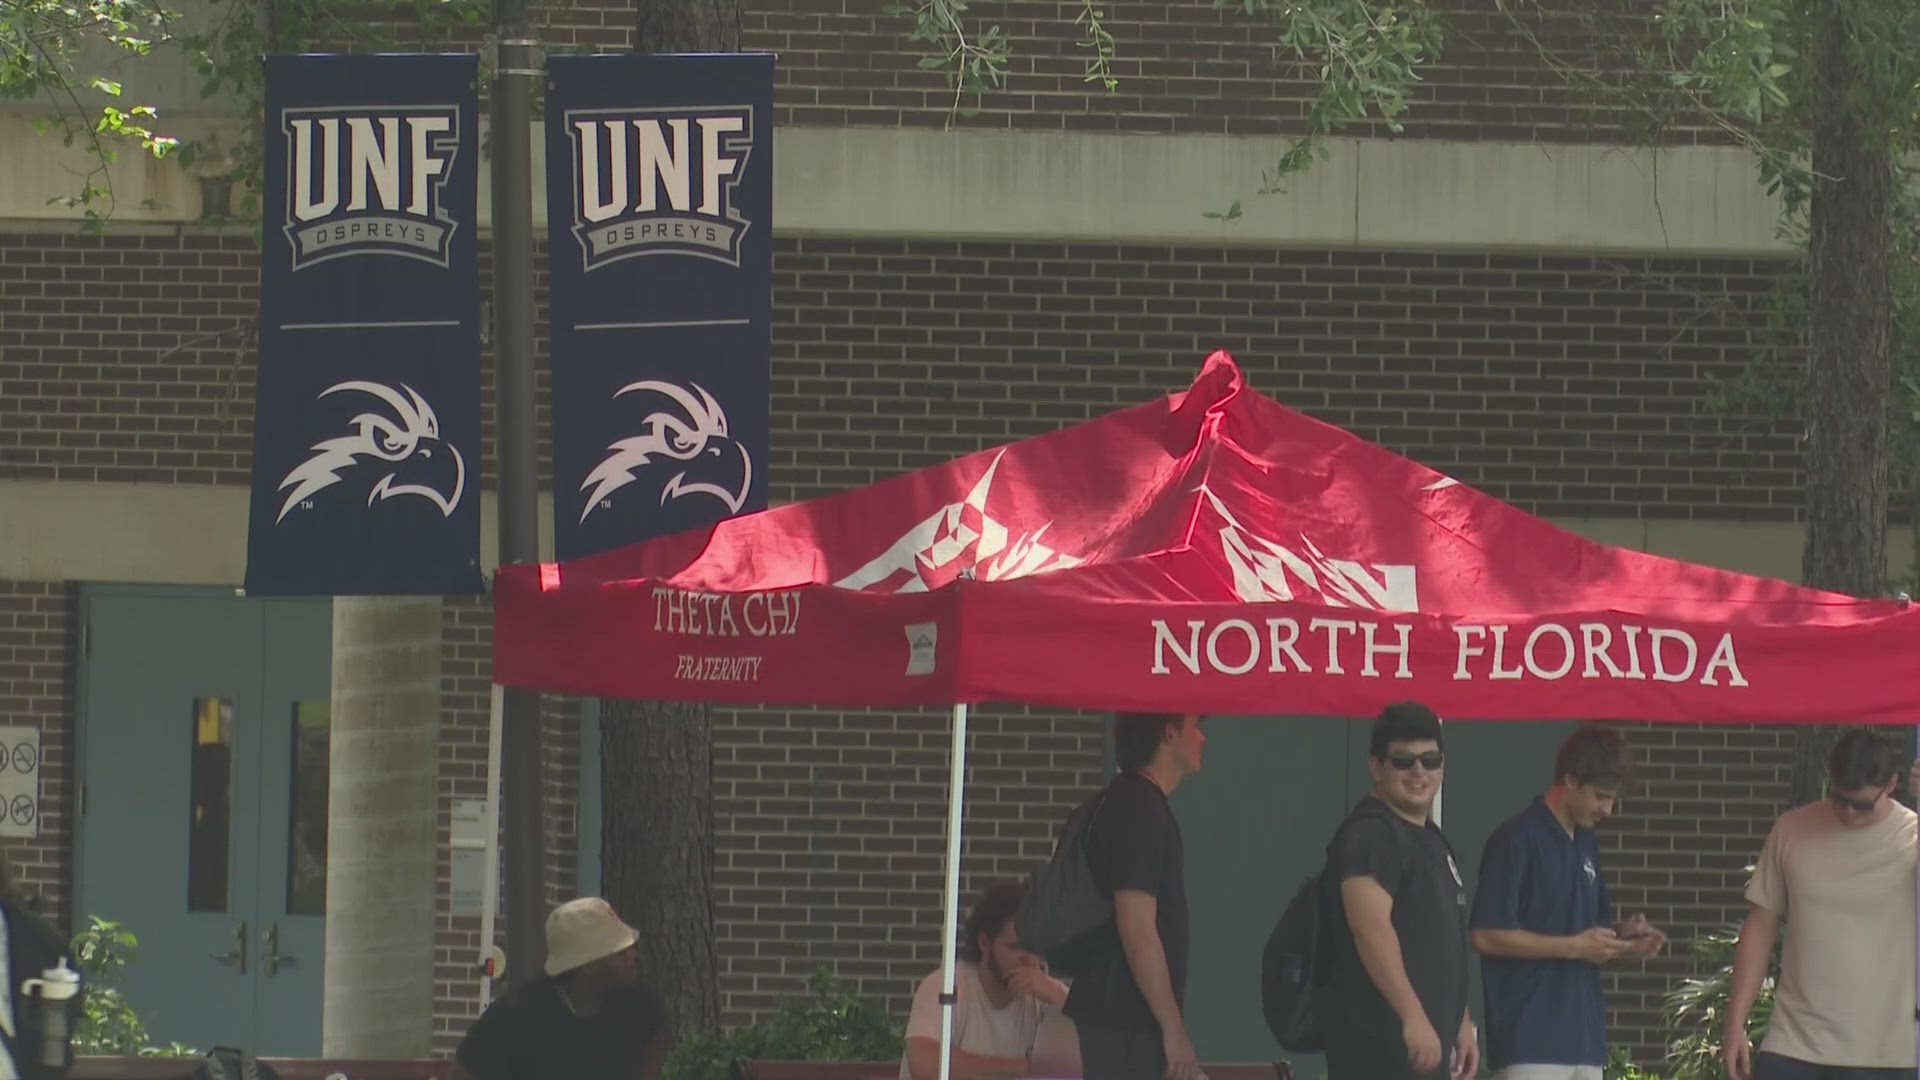 UNF's strategic plan hopes to grow the student population by more than 50% and become one of the top 100 public universities in the country.